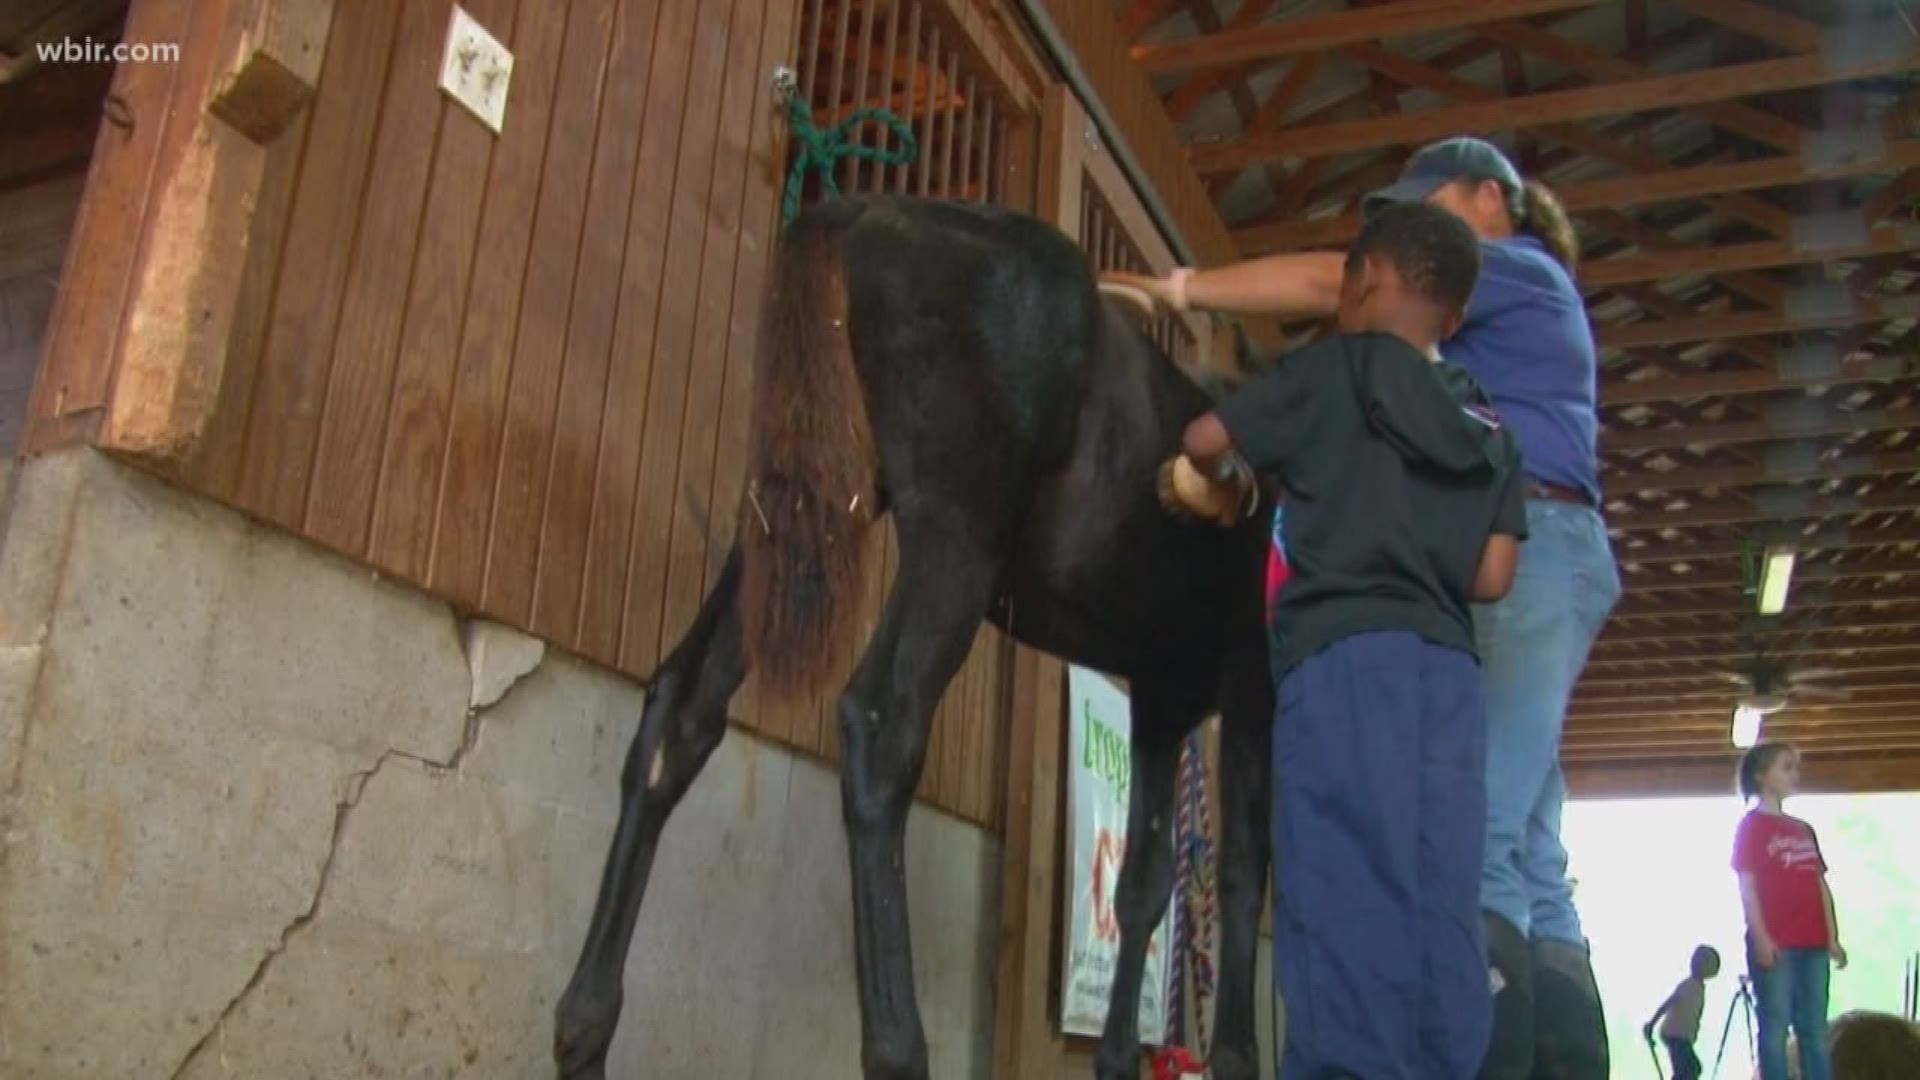 A local therapeutic horse farm is now in jeopardy